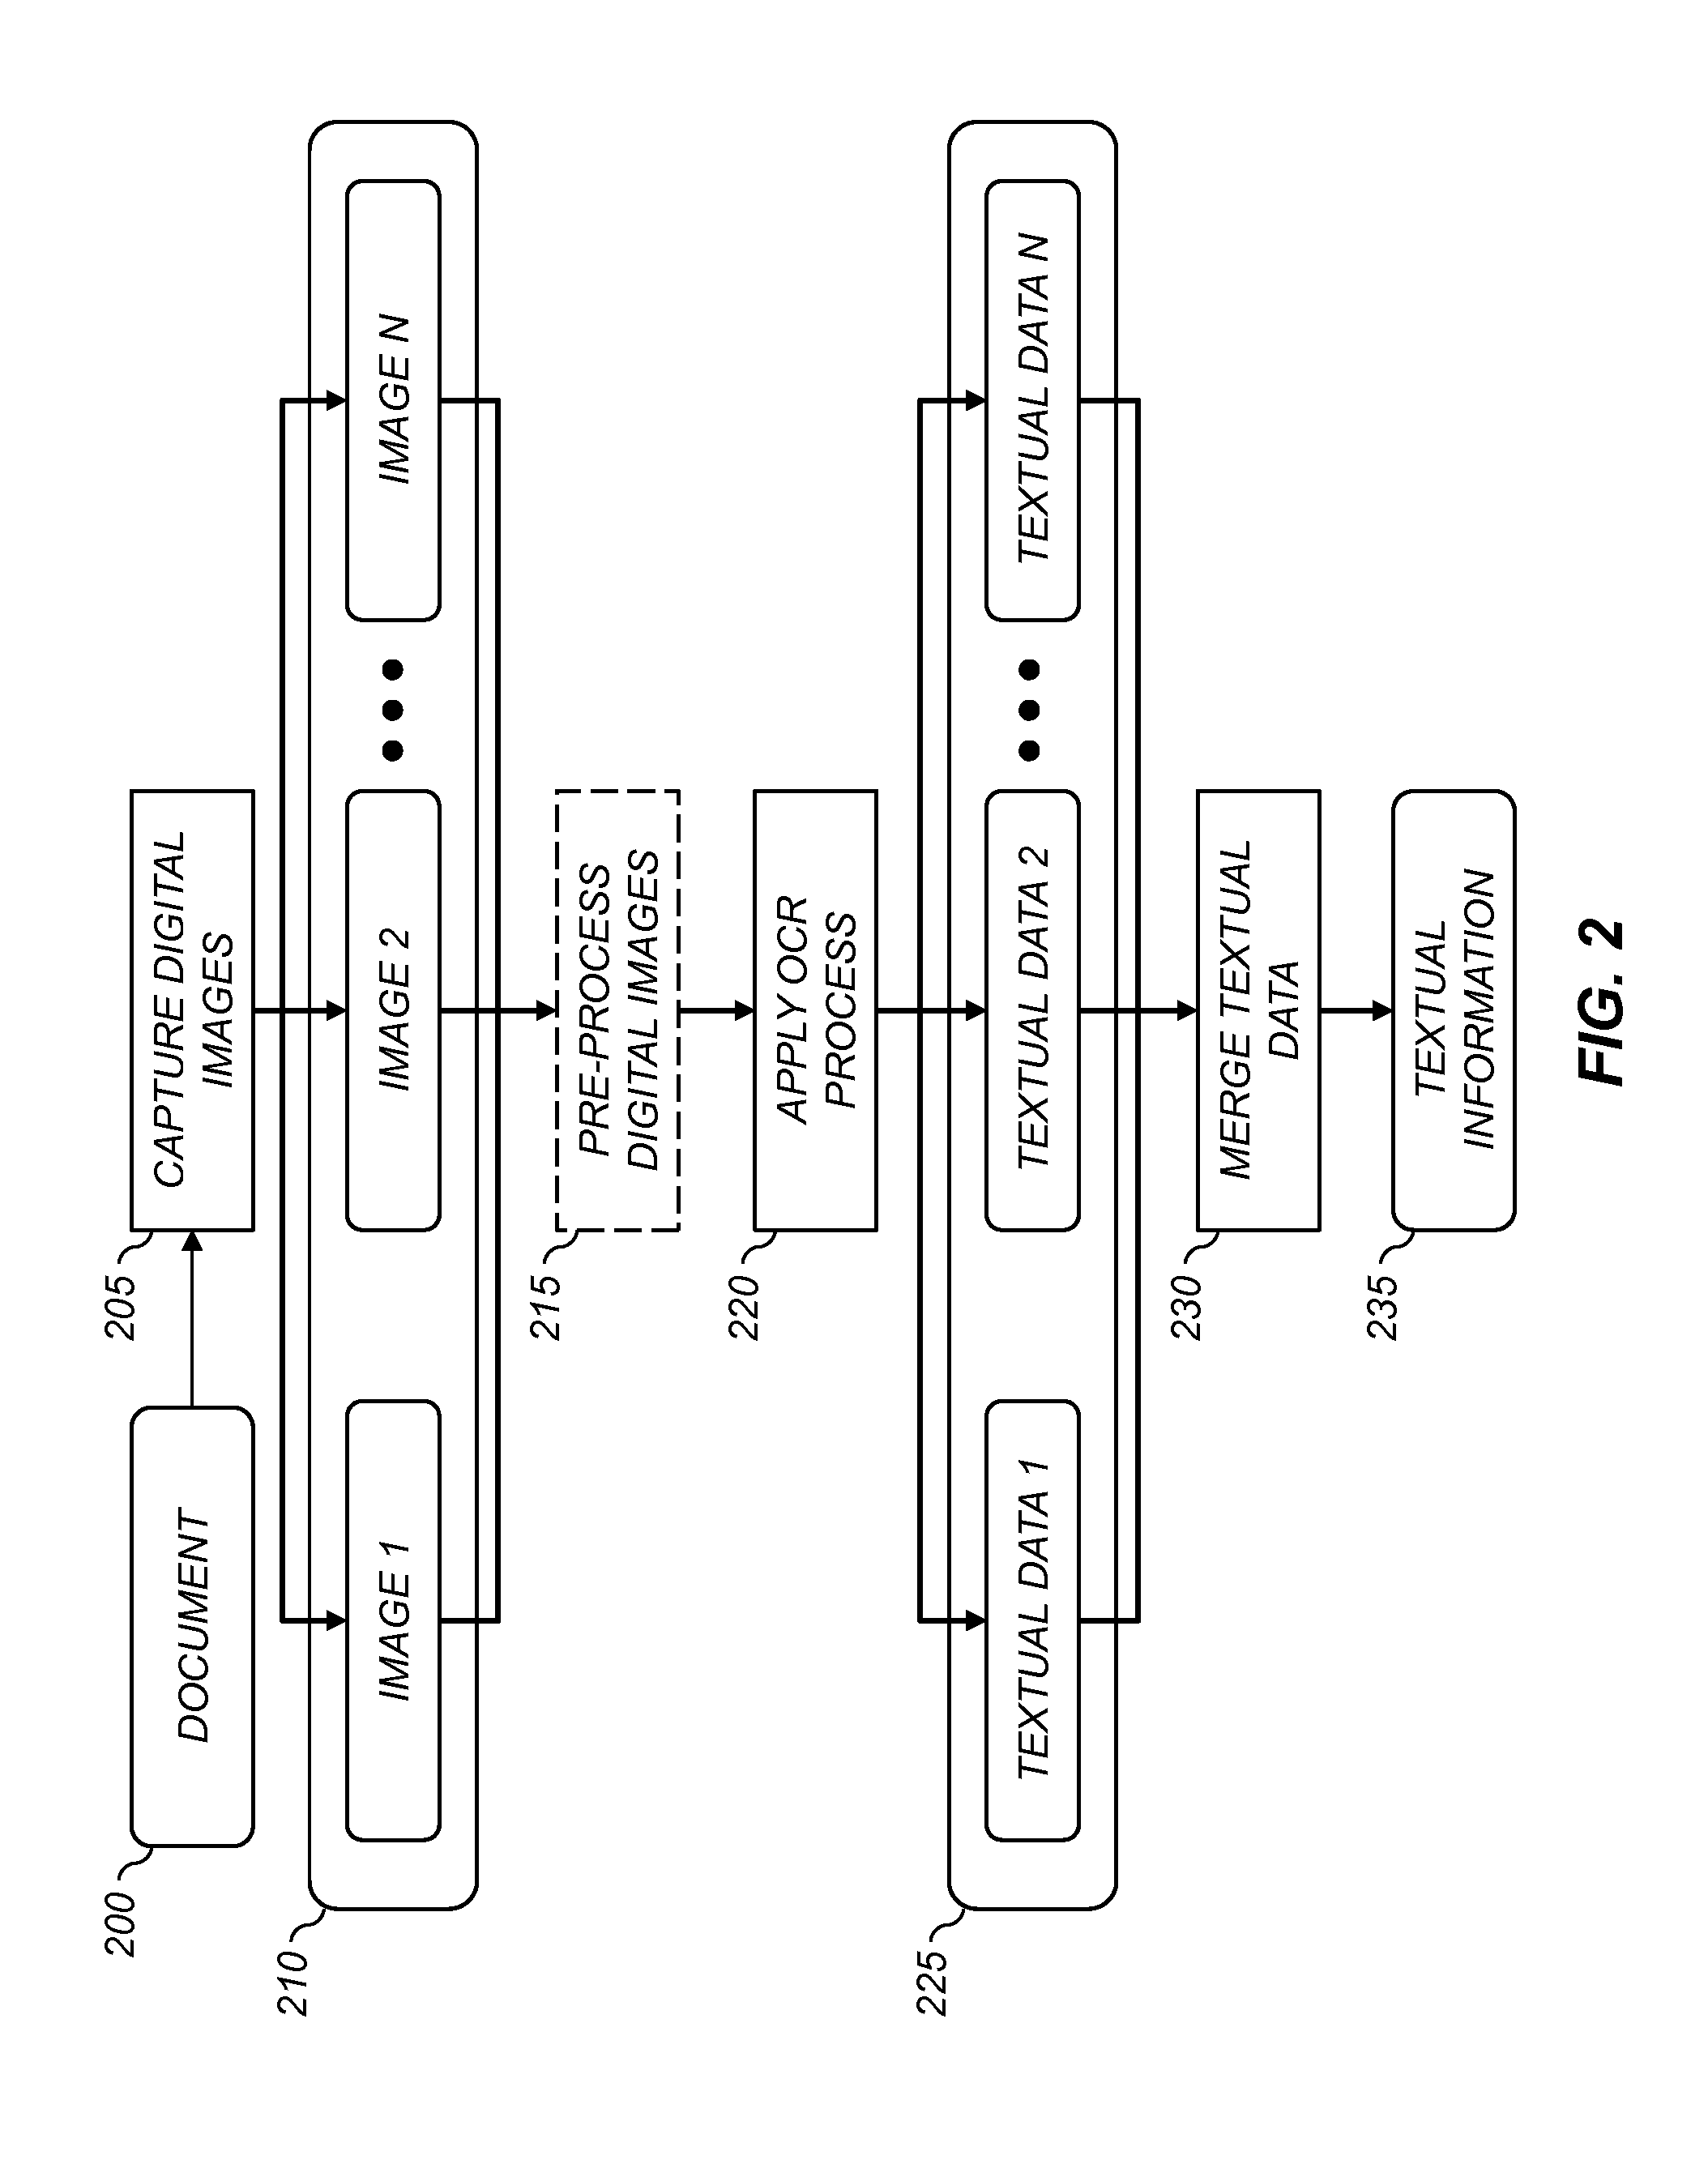 Image capture device for extracting textual information